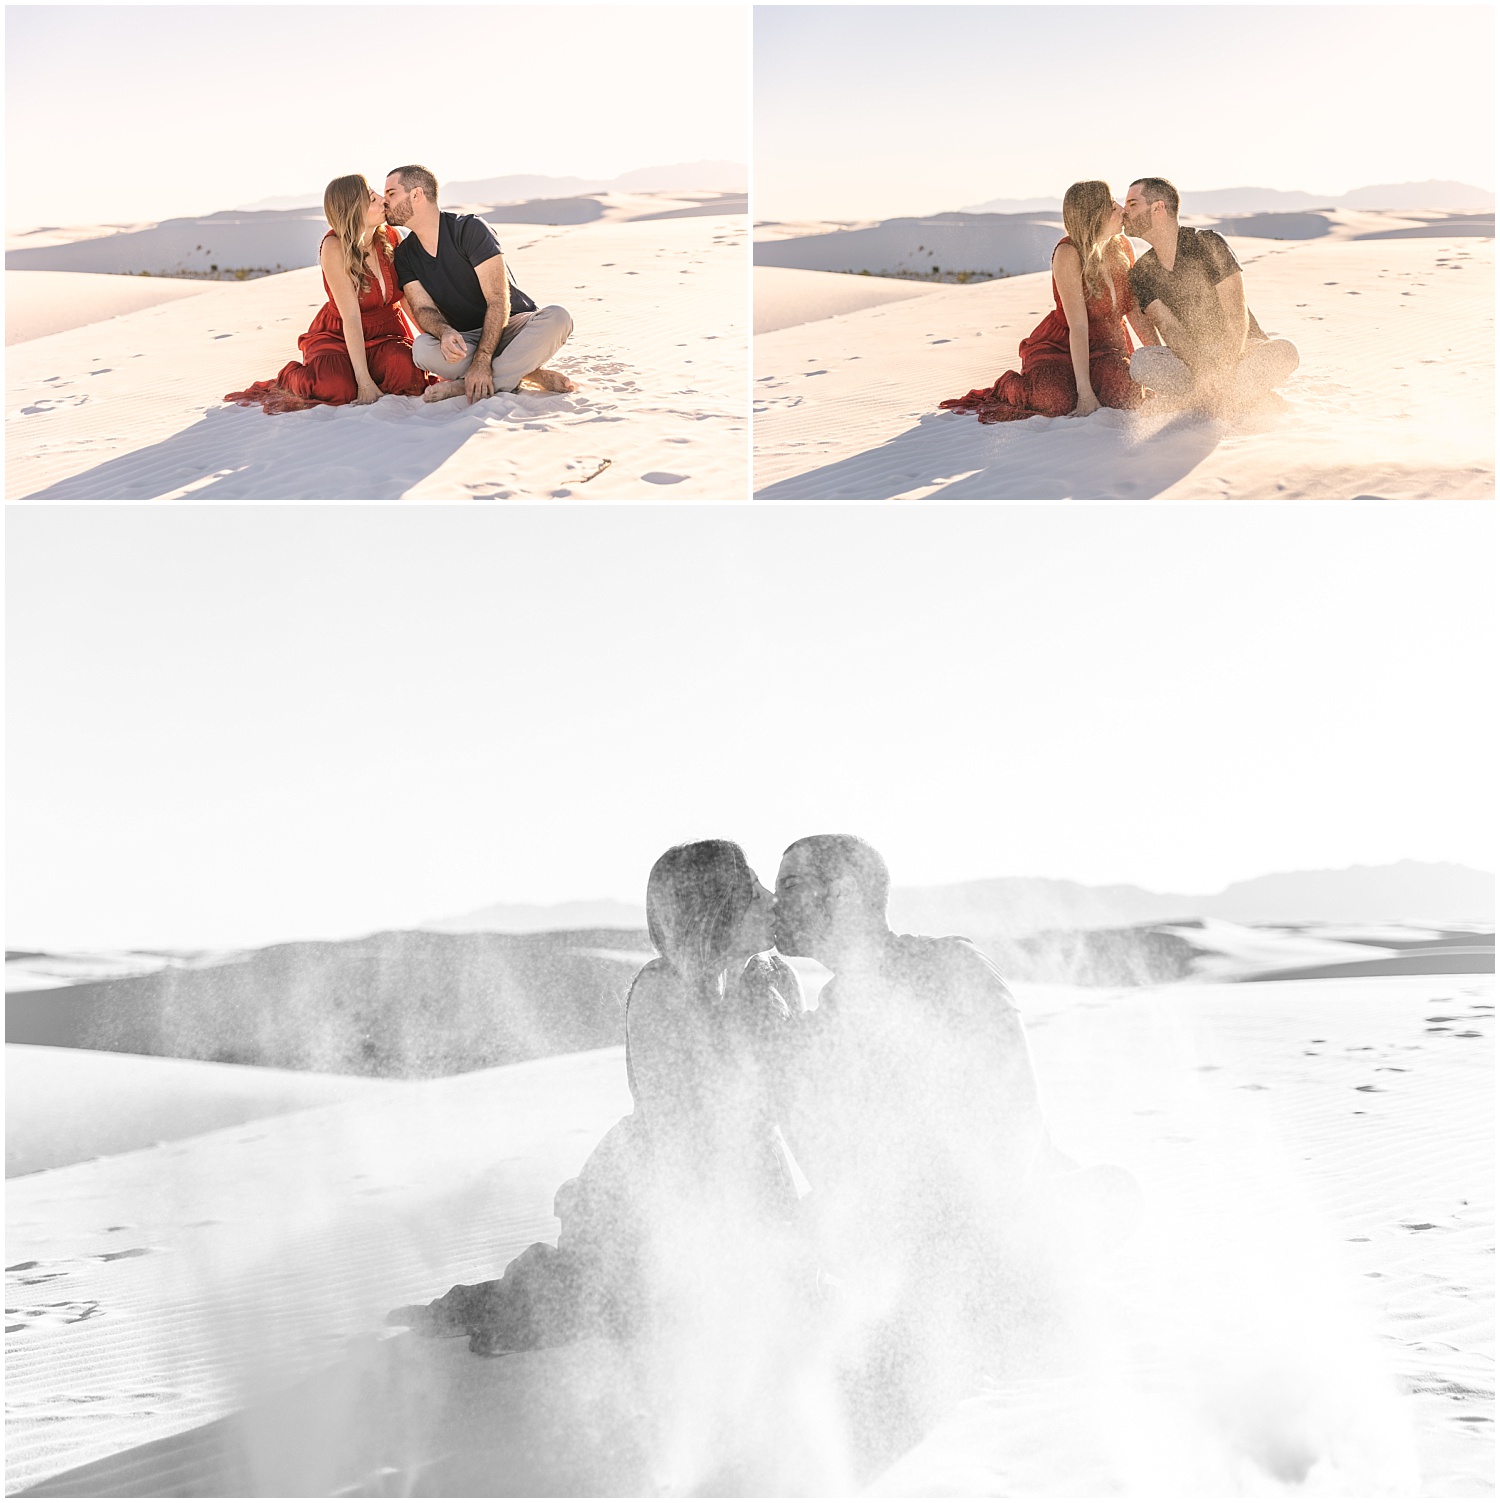 Sand blowing around couple and glittering in sunlight at White Sands National Park